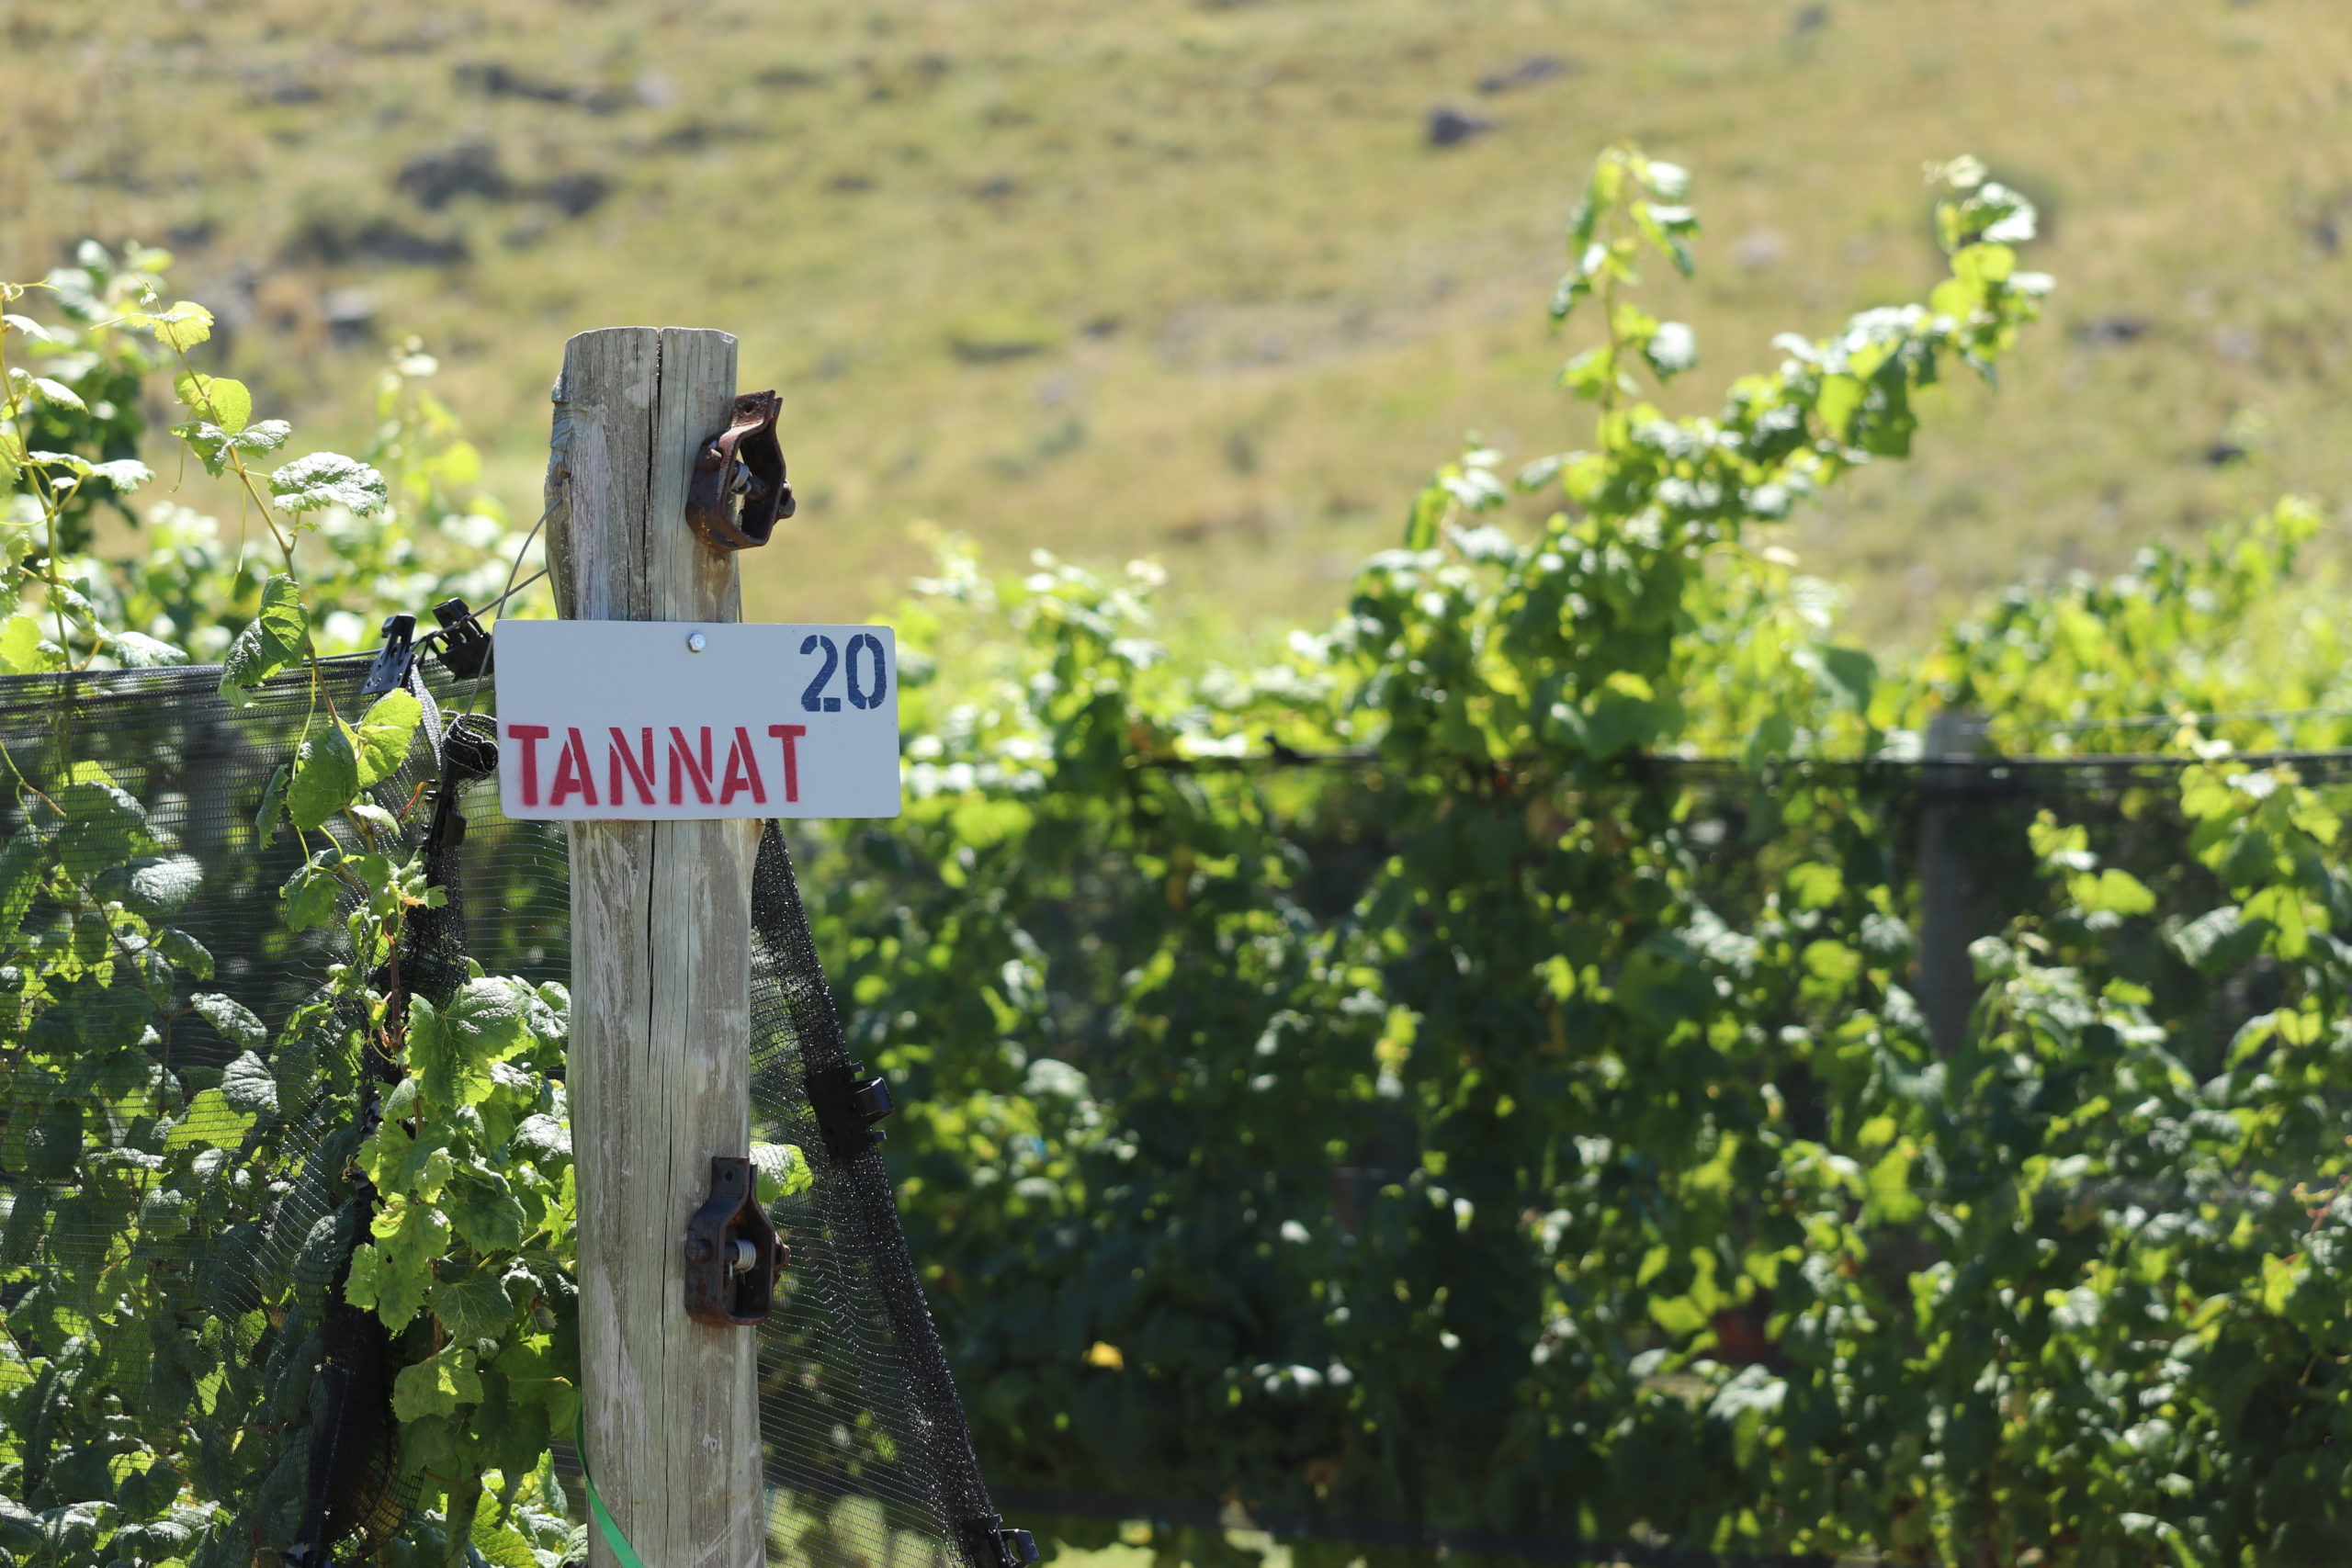 Summer vineyard with a sign post reading Tannat 20 to show the vineyard block